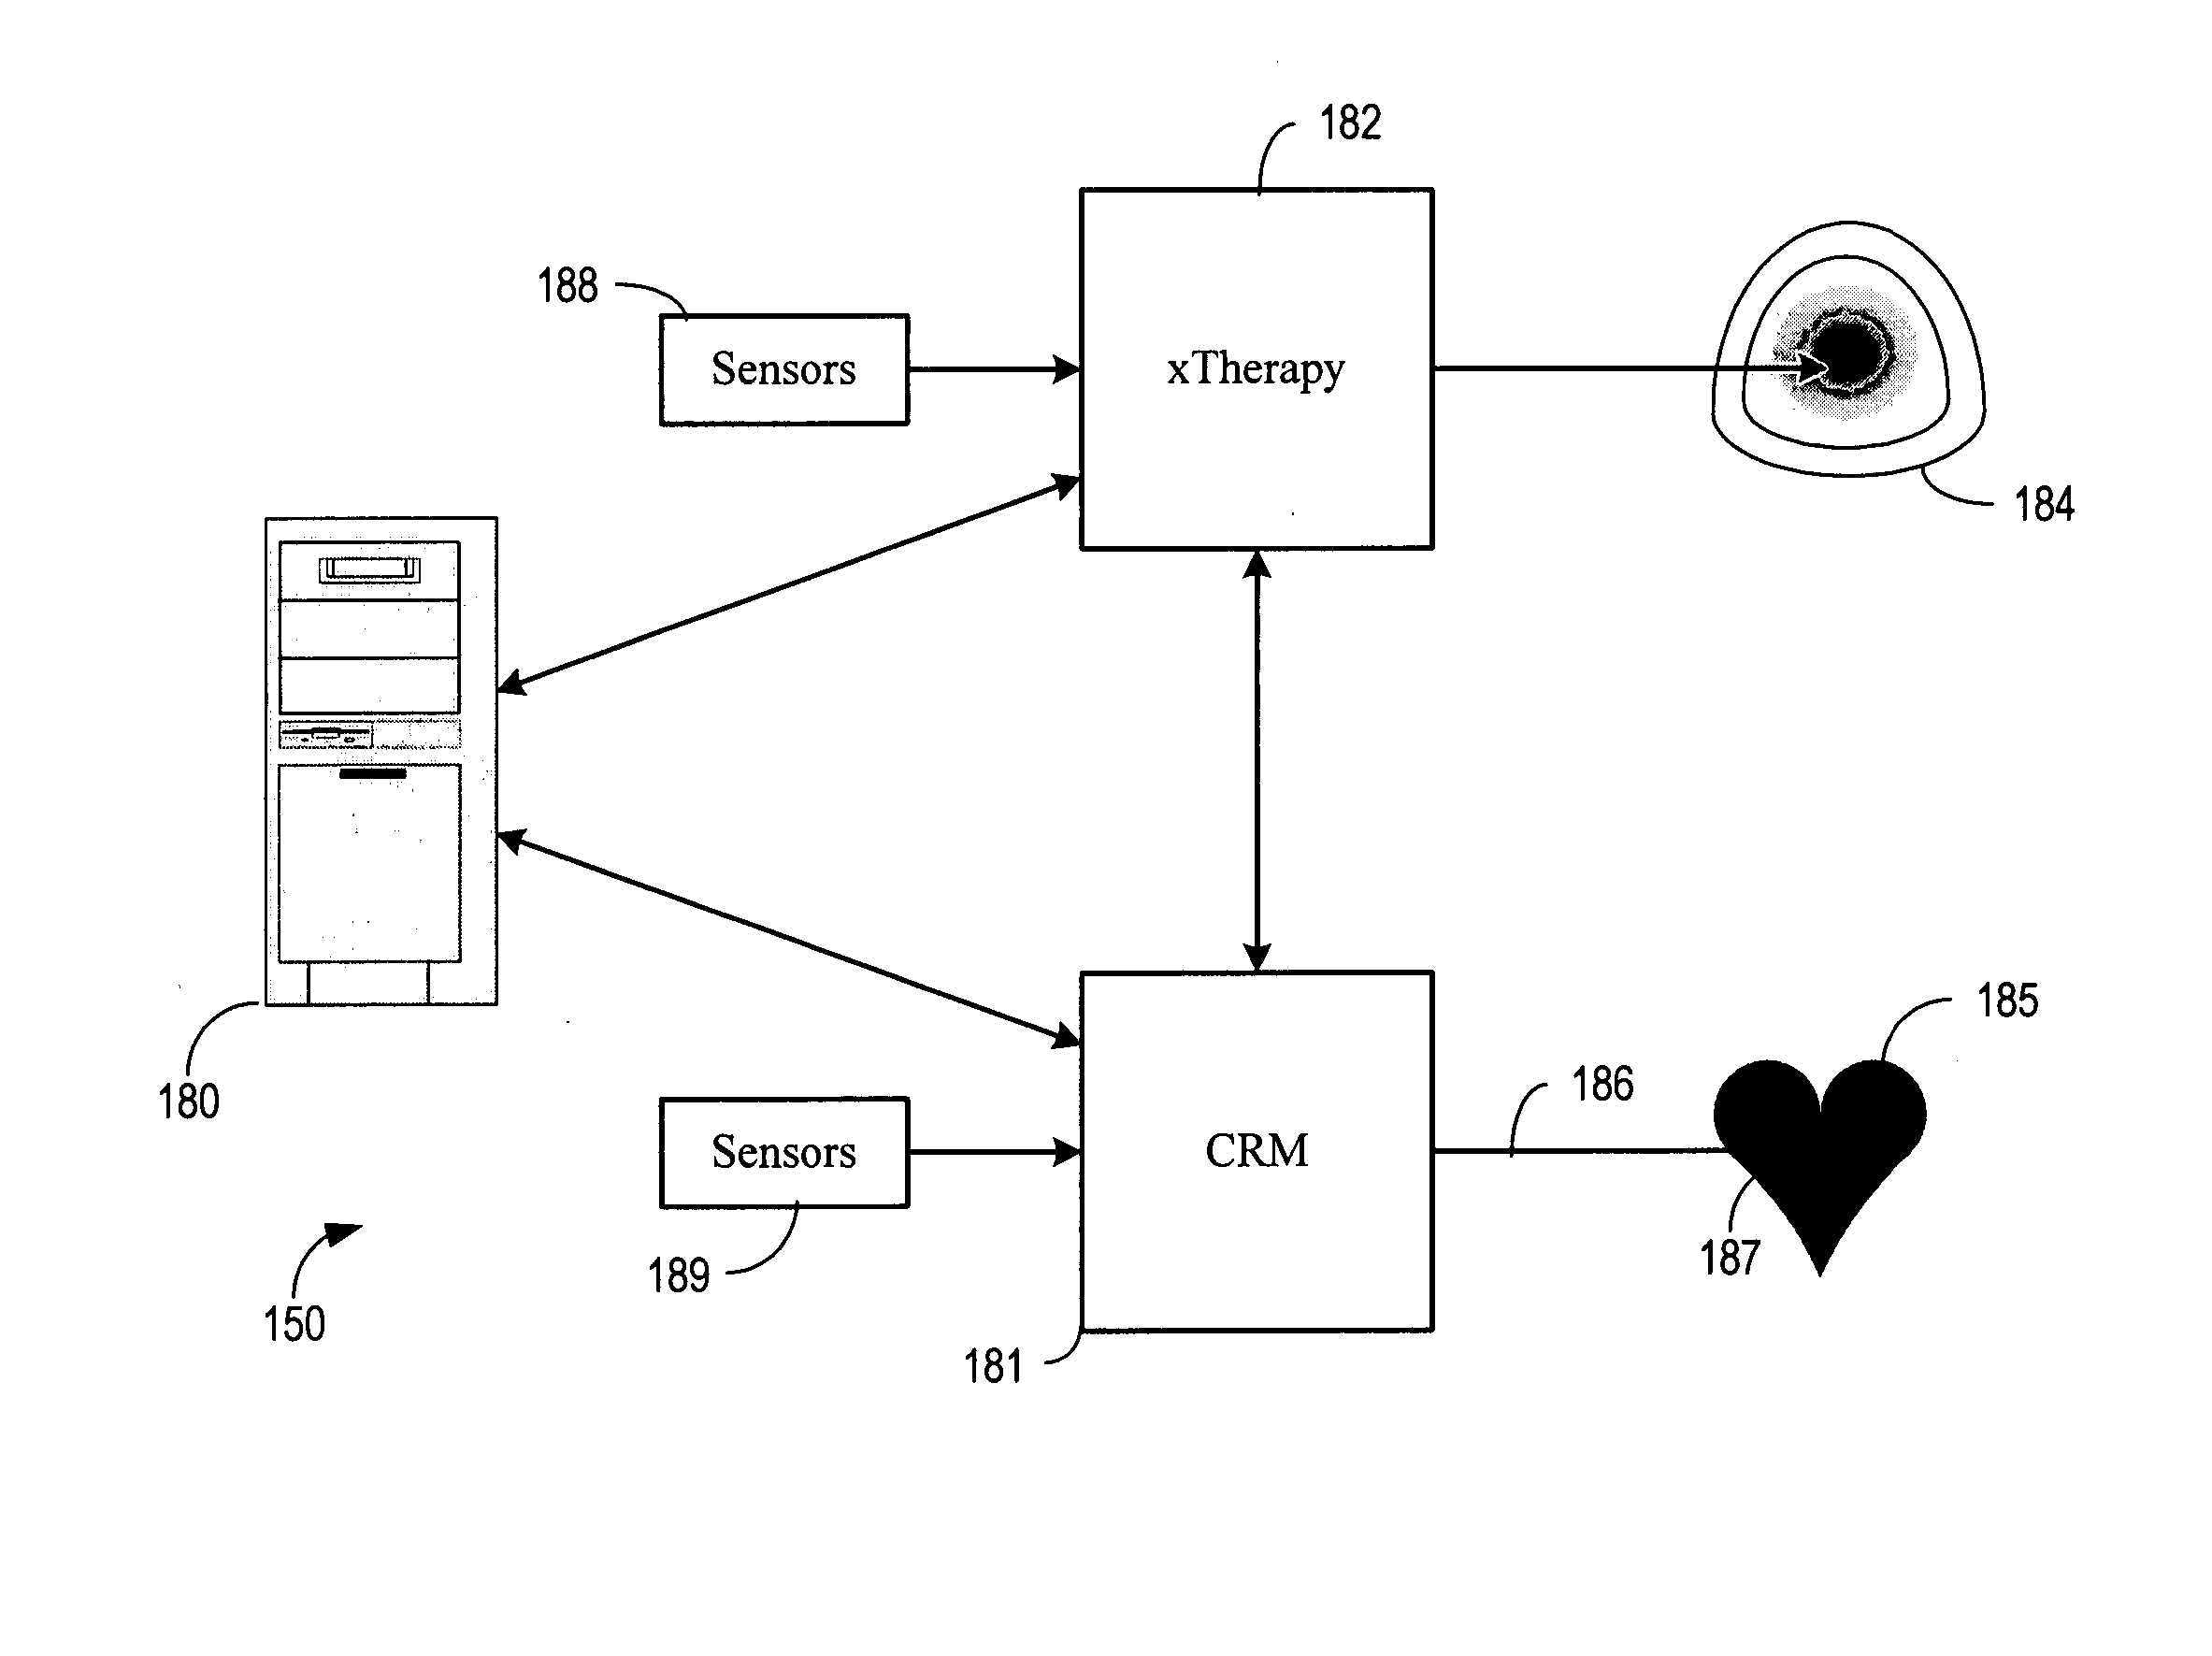 Methods and systems for control of gas therapy